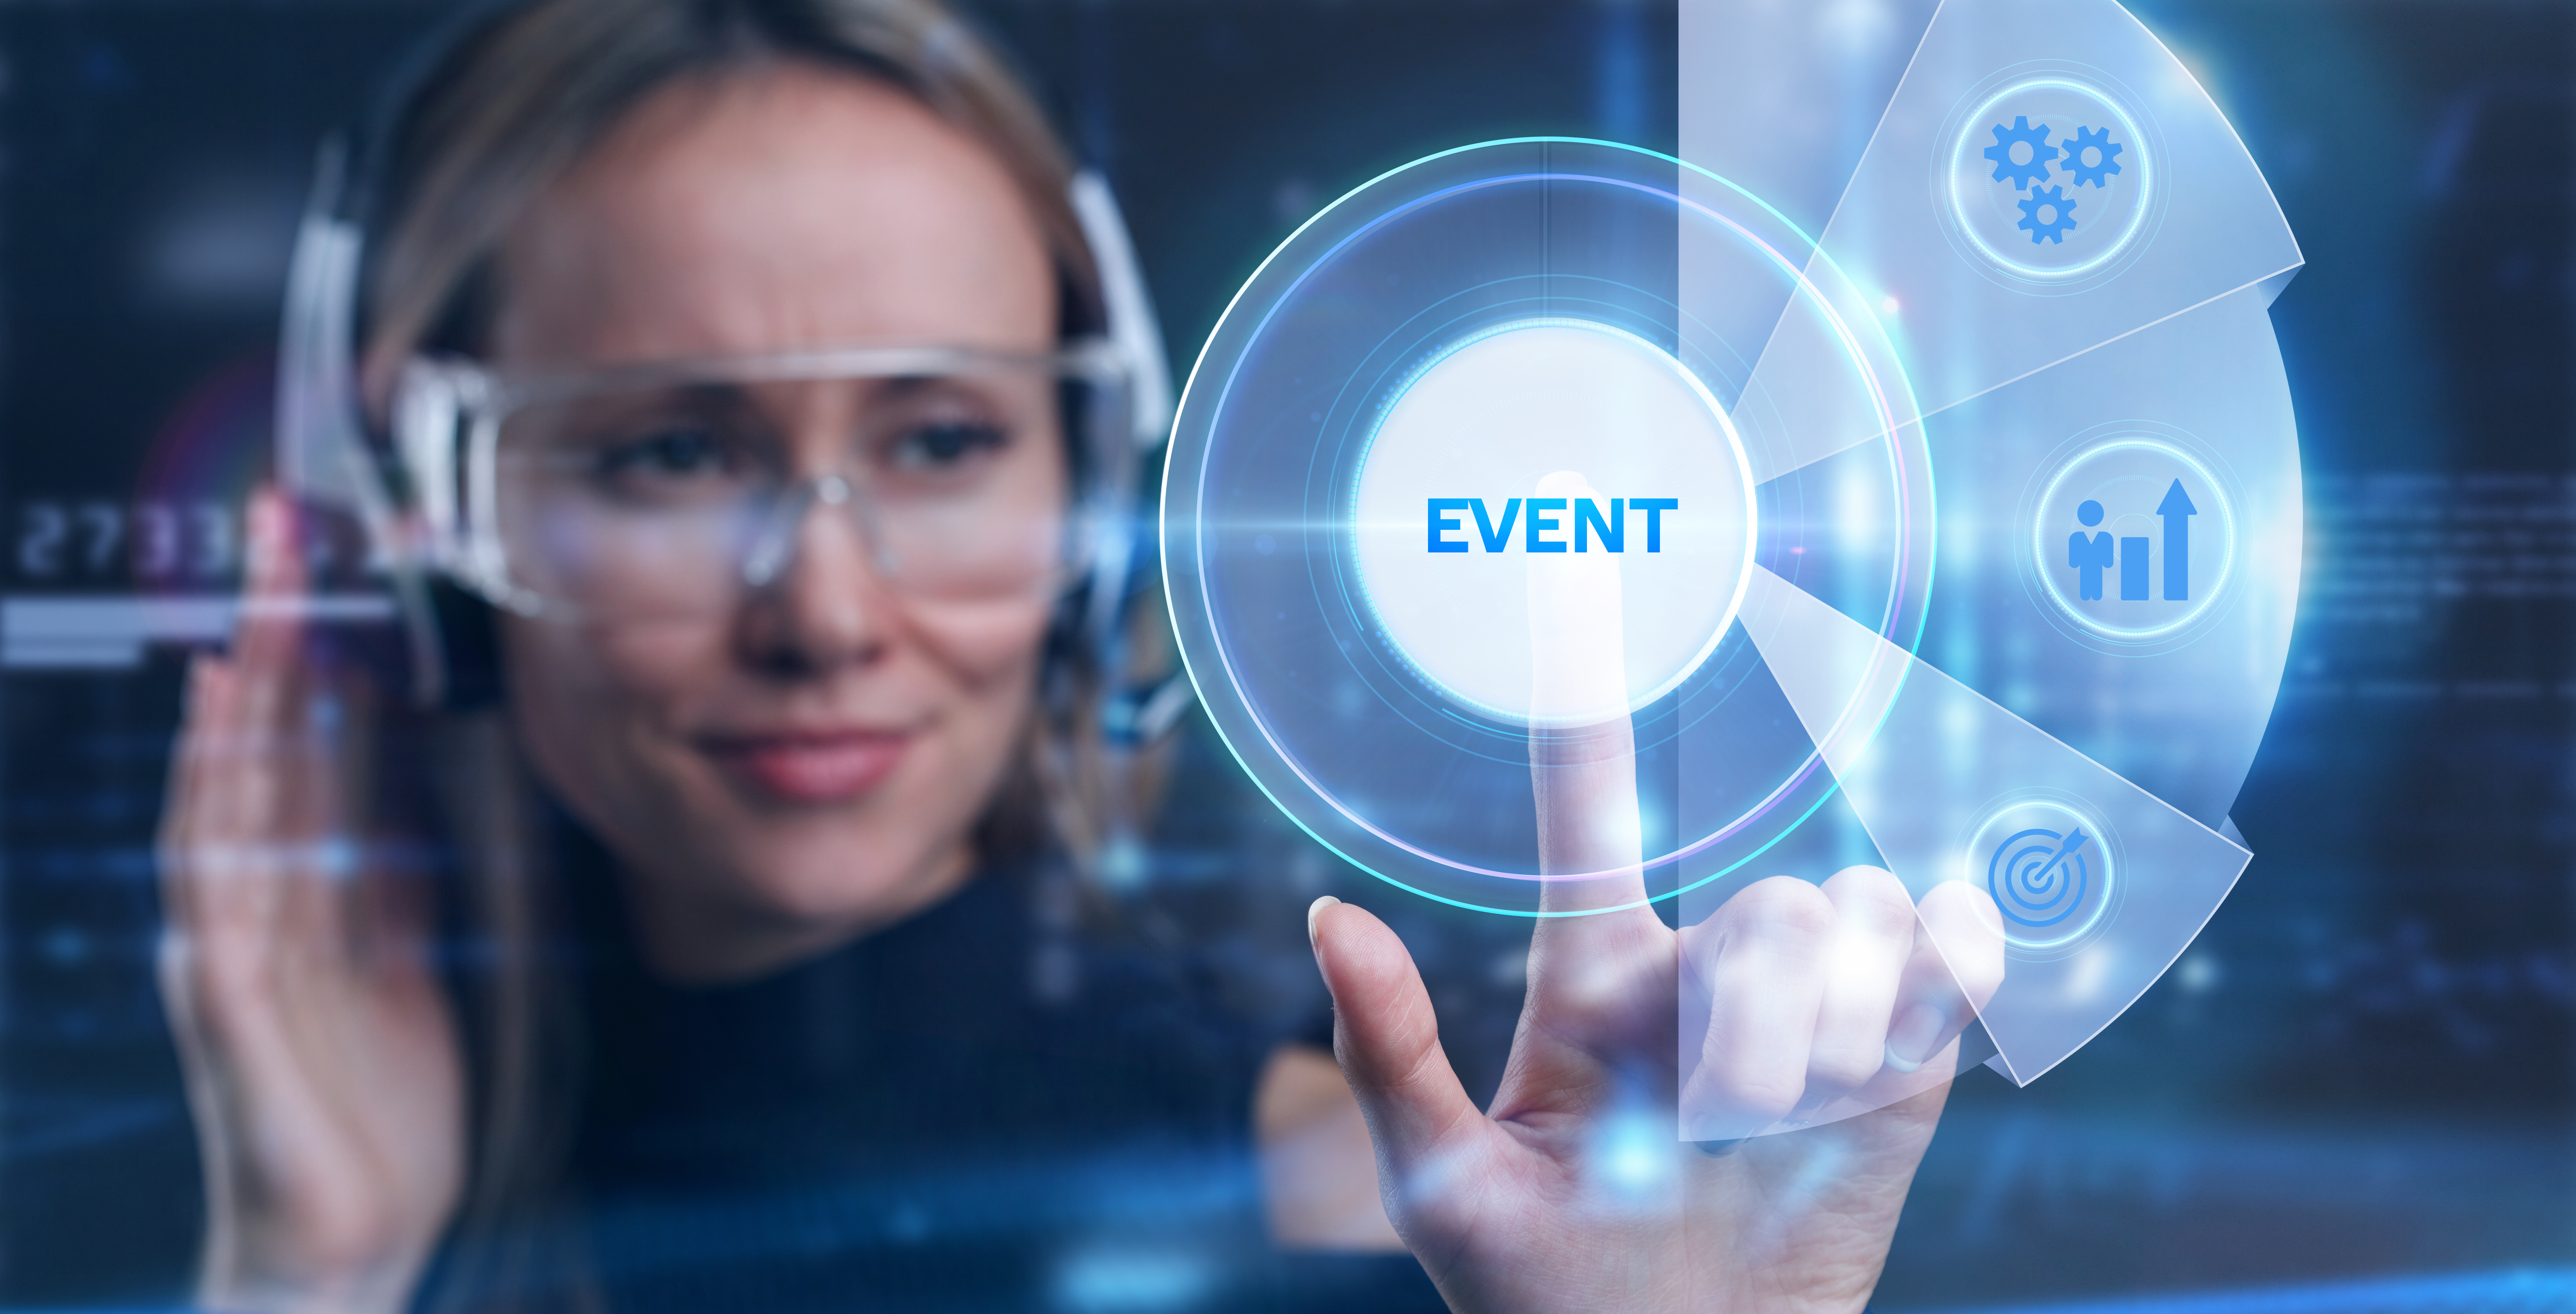 Events & Technology: What Meeting Professionals Need to Know